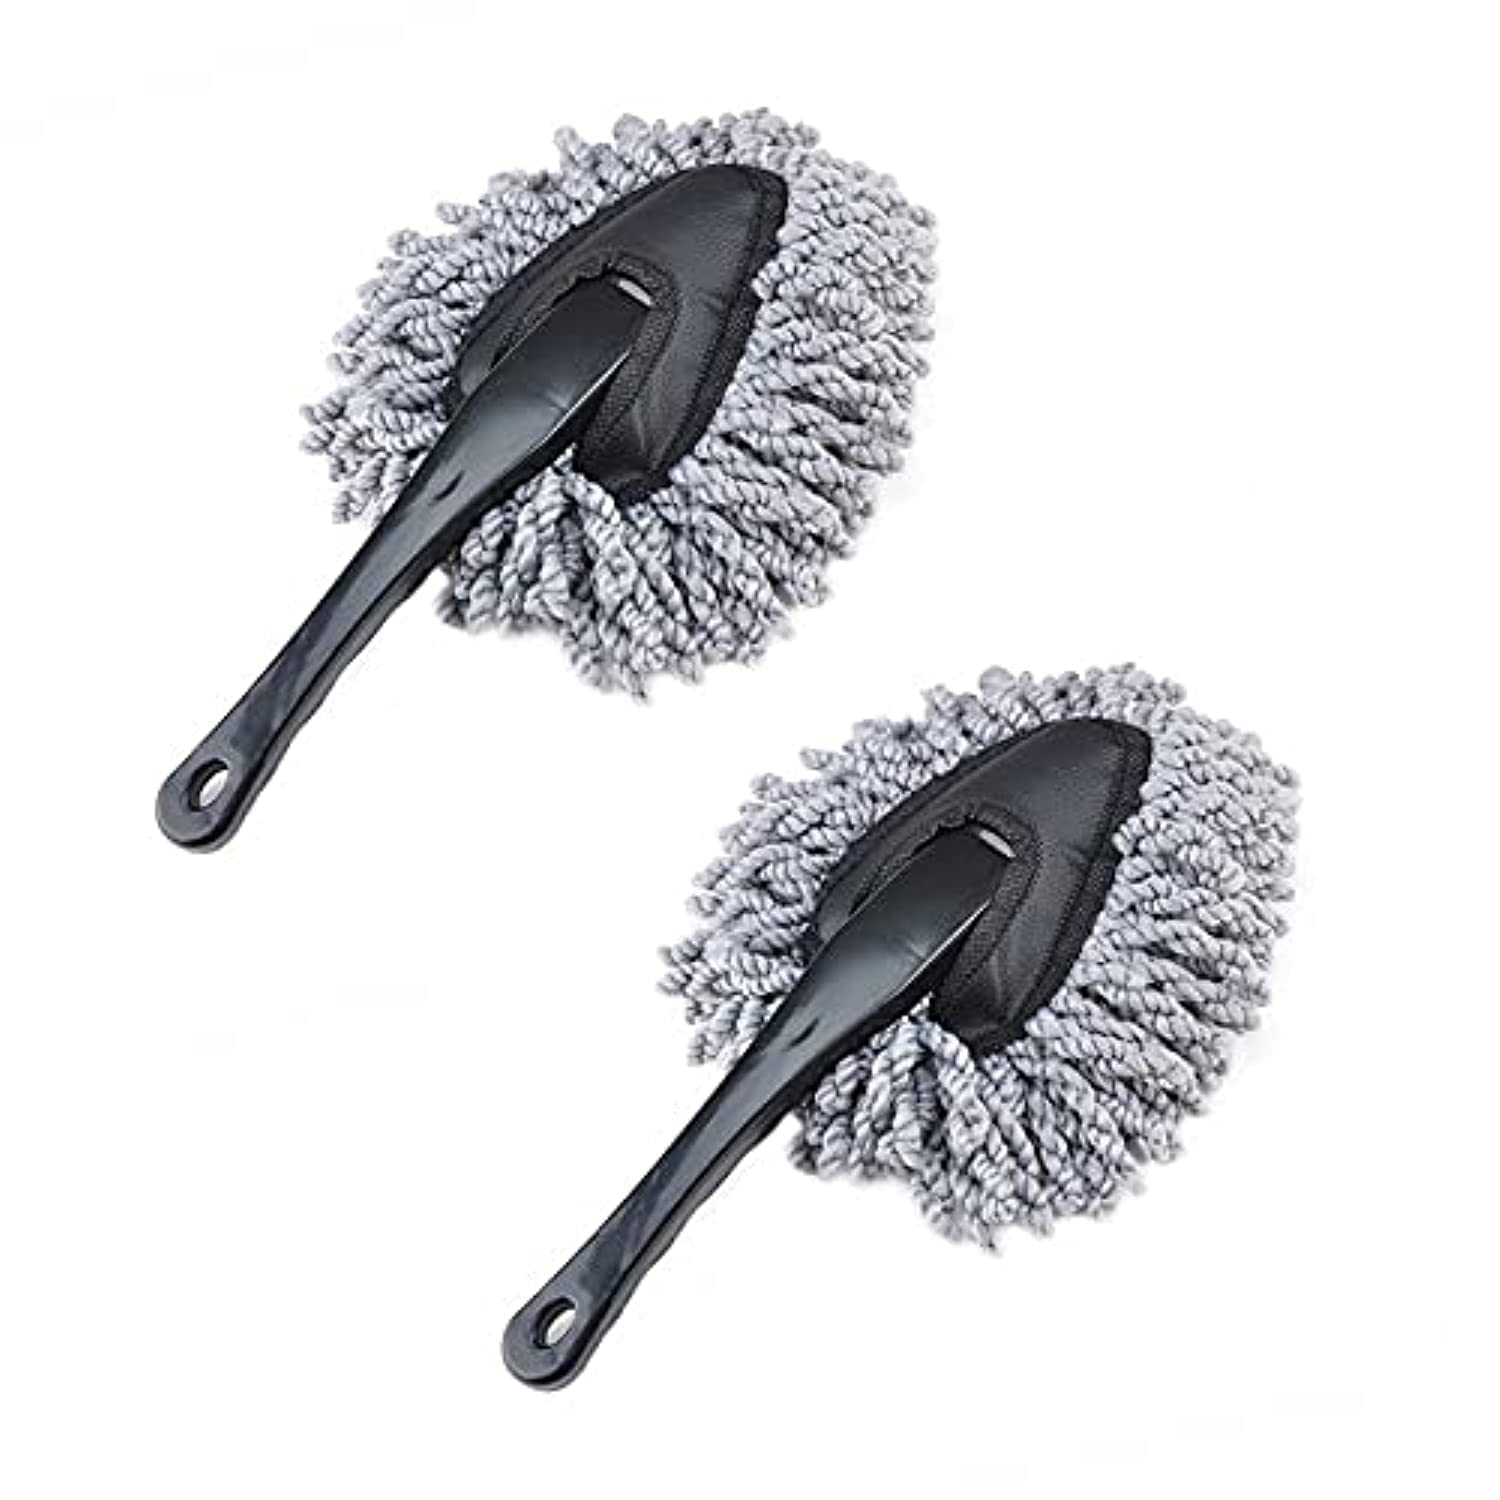 Book Cover IPELY 2 Pack Super Soft Microfiber Car Dash Duster Brush for Car Cleaning Home Kitchen Computer Cleaning Brush Dusting Tool Duster(2 Pack)